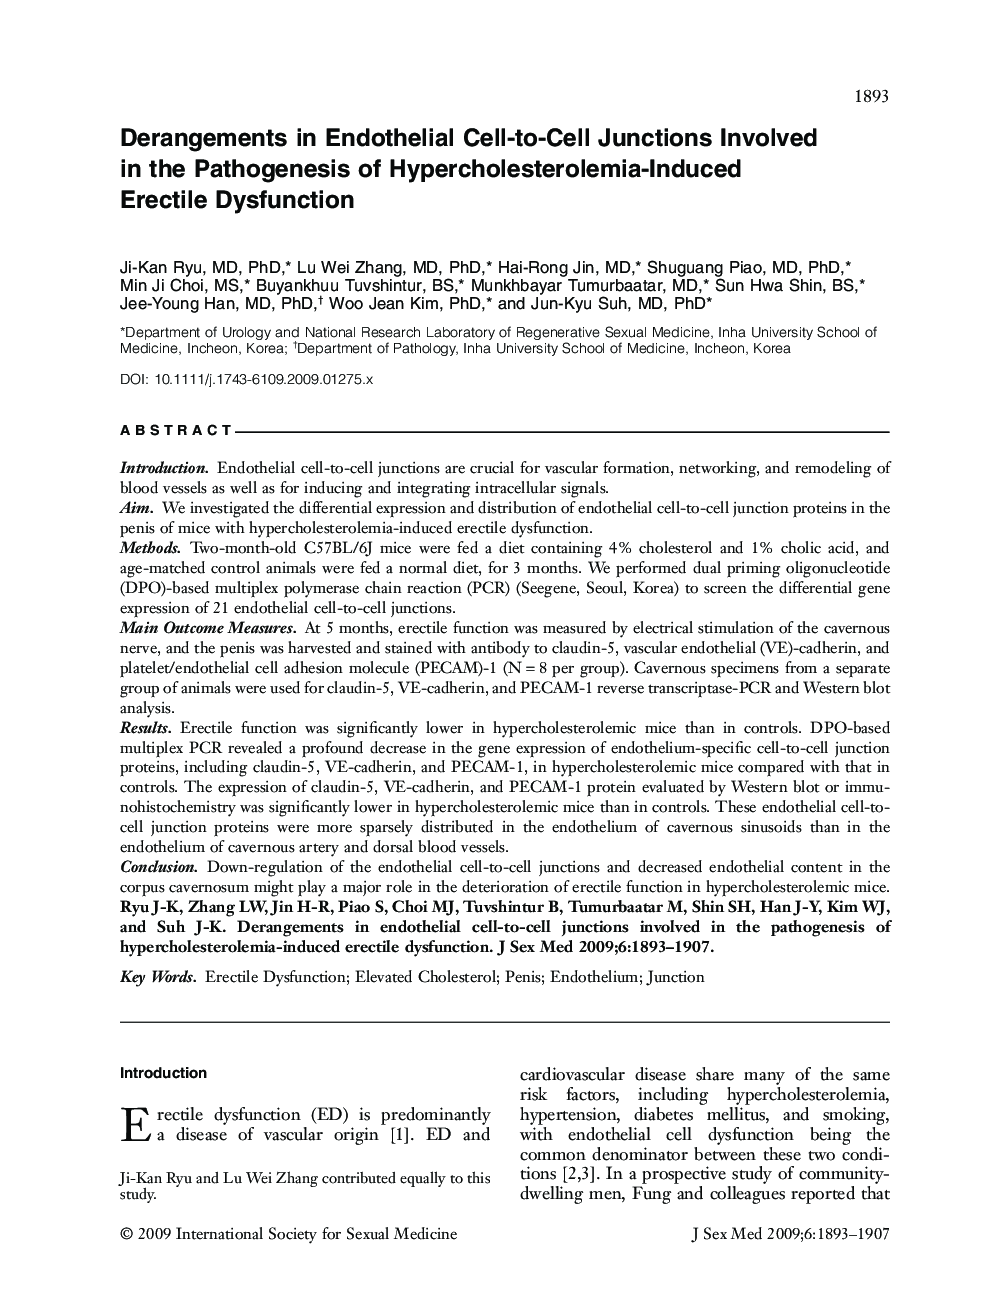 Derangements in Endothelial Cell-to-Cell Junctions Involved in the Pathogenesis of Hypercholesterolemia-Induced Erectile Dysfunction